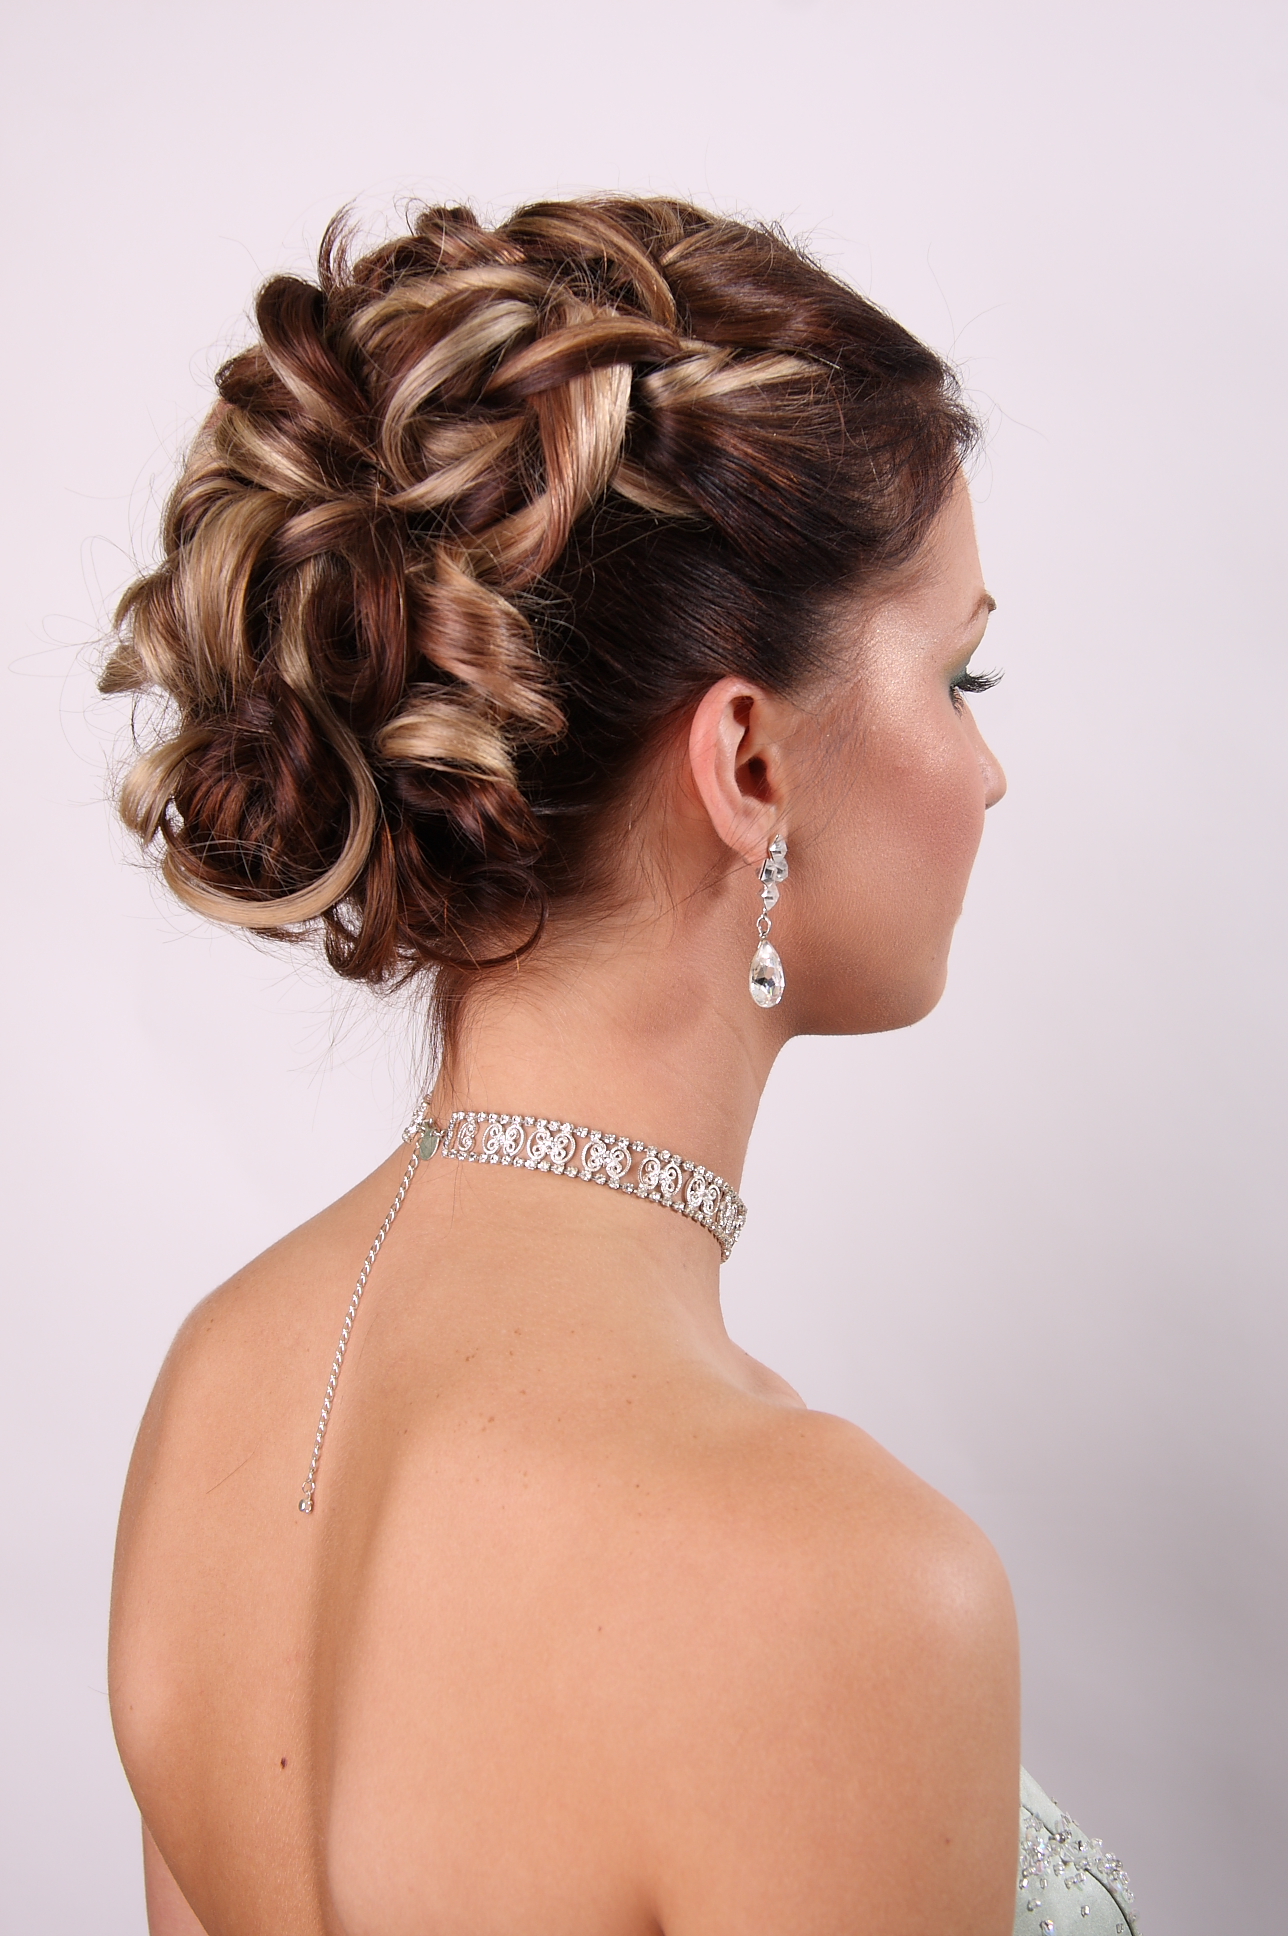 woman with long hair in romantic updo style